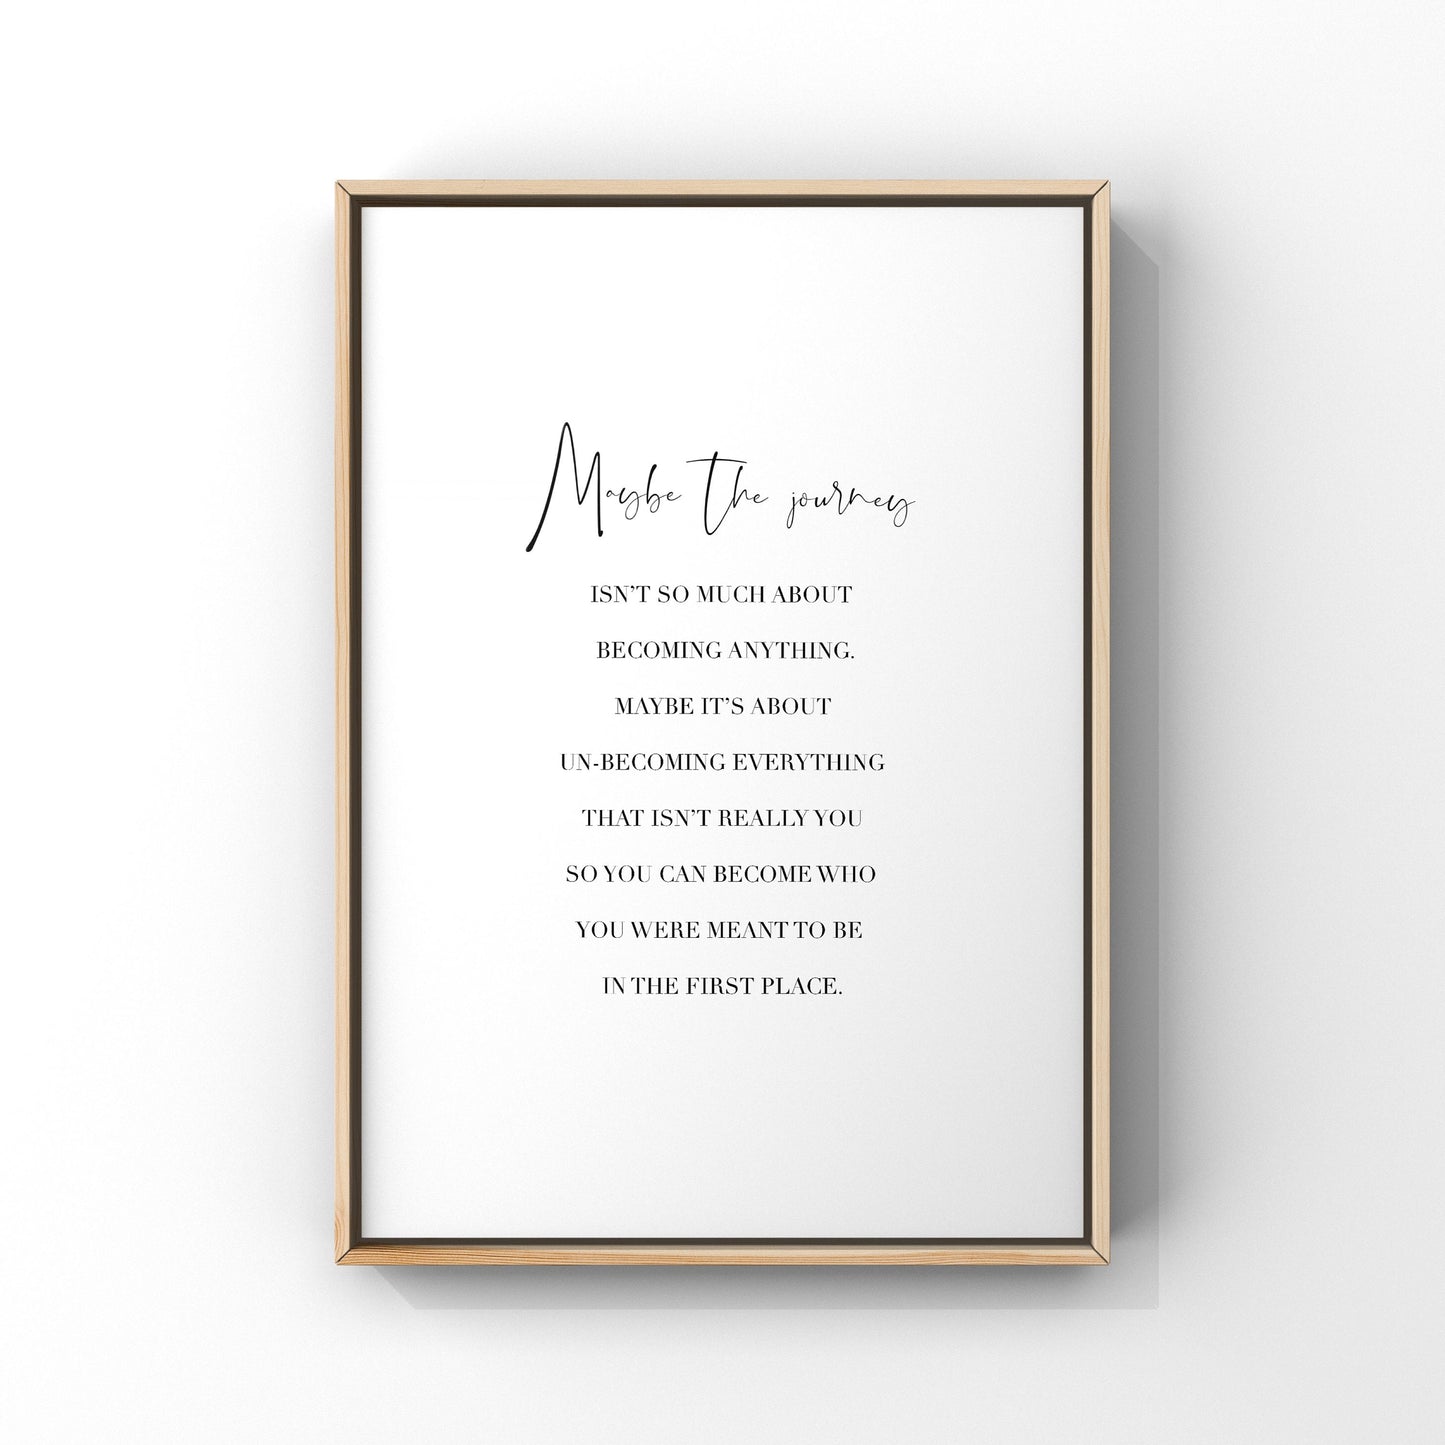 Maybe the journey,Unbecoming art print,Empowering quotes,Self discovery quote poster,Meditation Wall Art,Yoga prints for wall,Affirmation